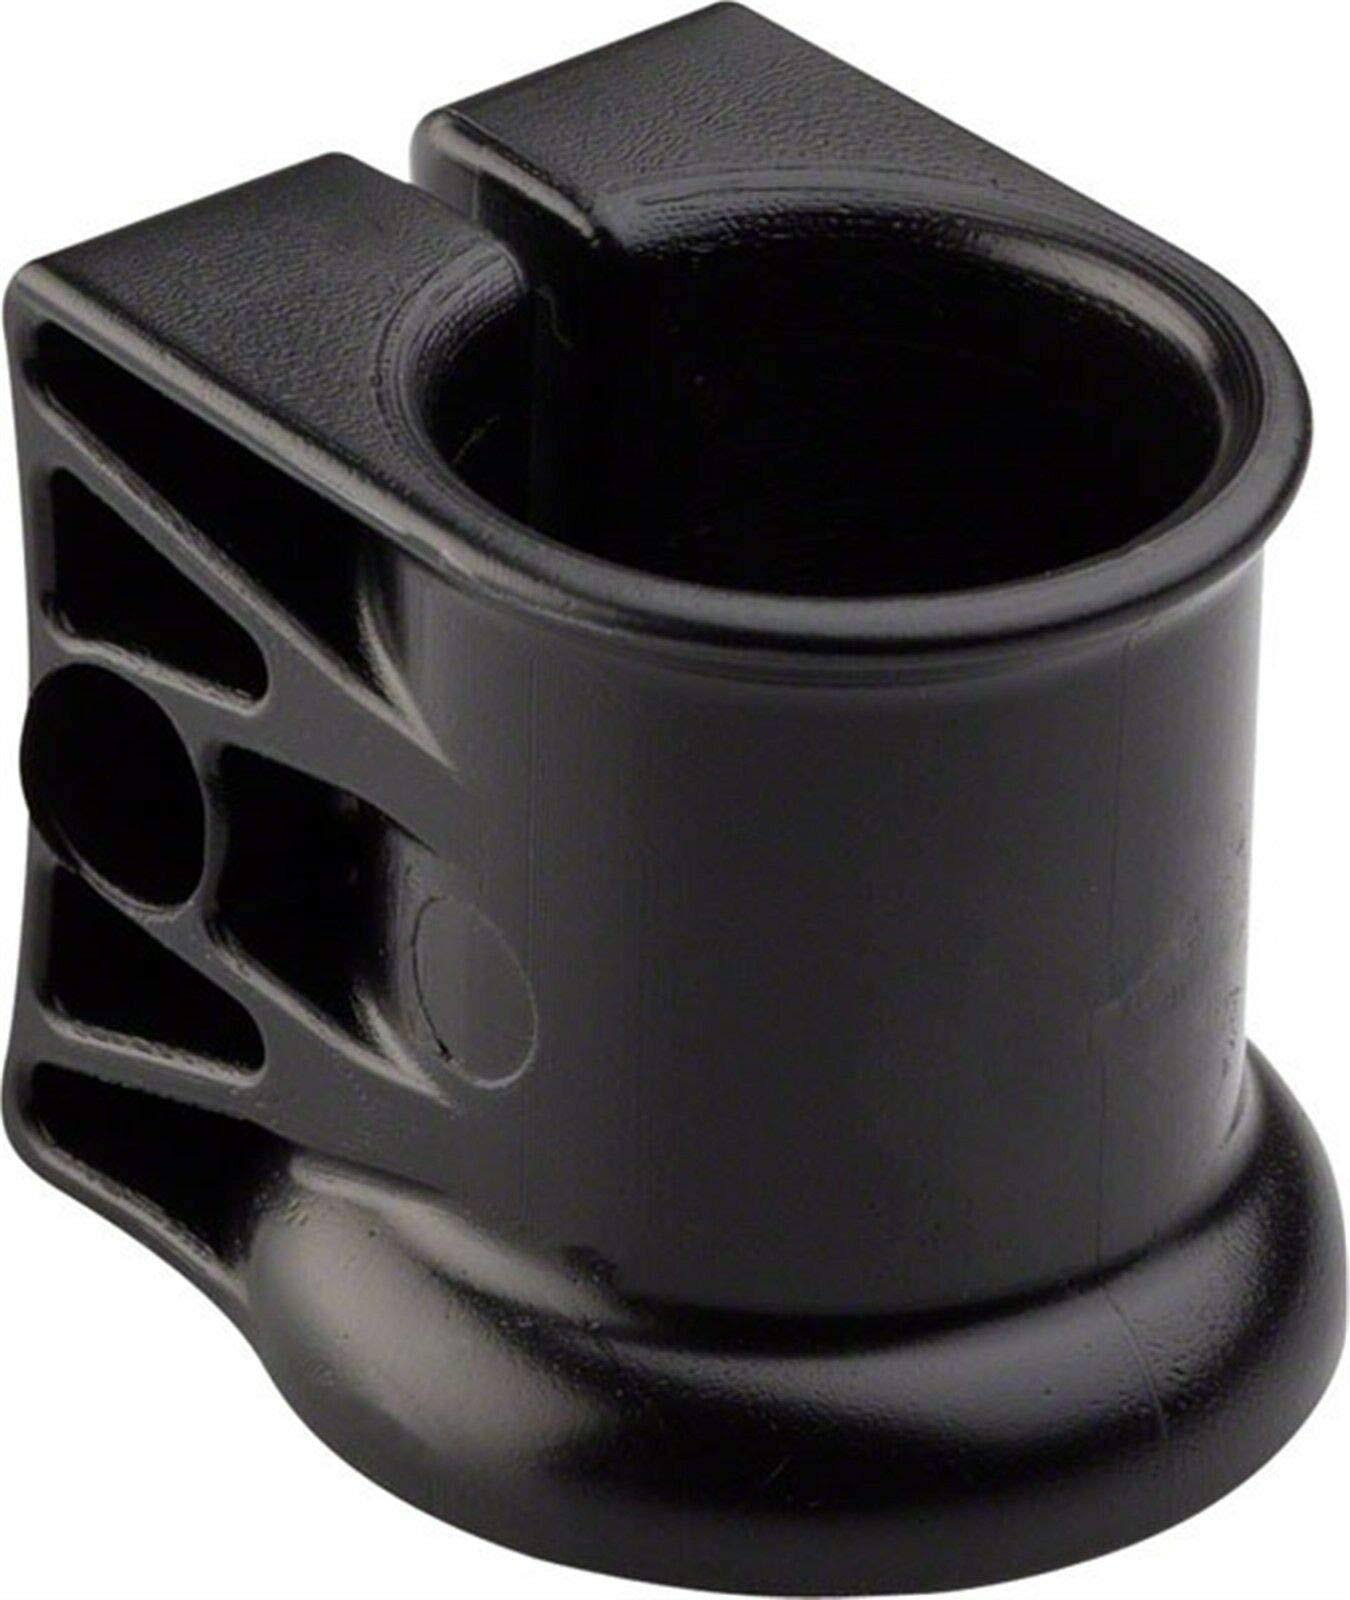 Wolf Tooth Components Valais Dropper Post Seat Bag Adaptor - 25mm